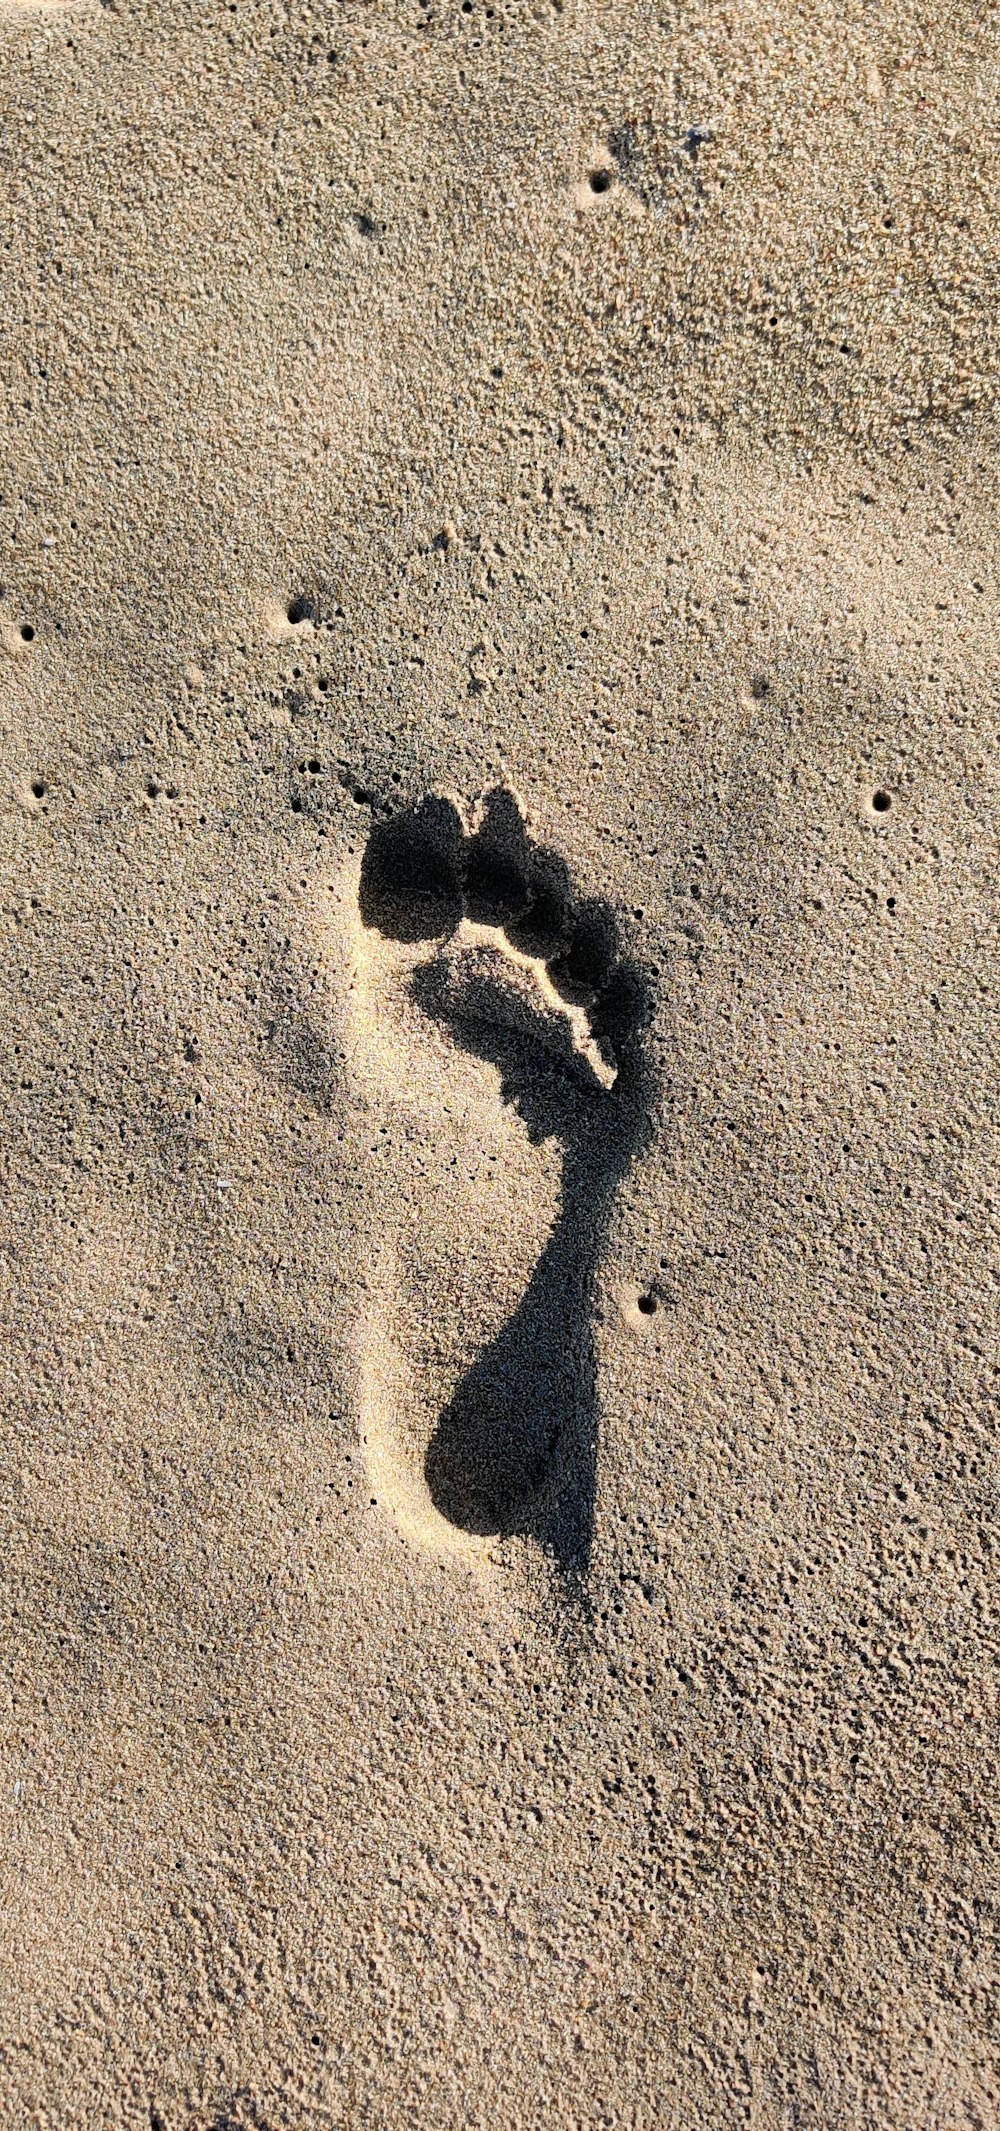 shadow of 2 person on brown sand during daytime